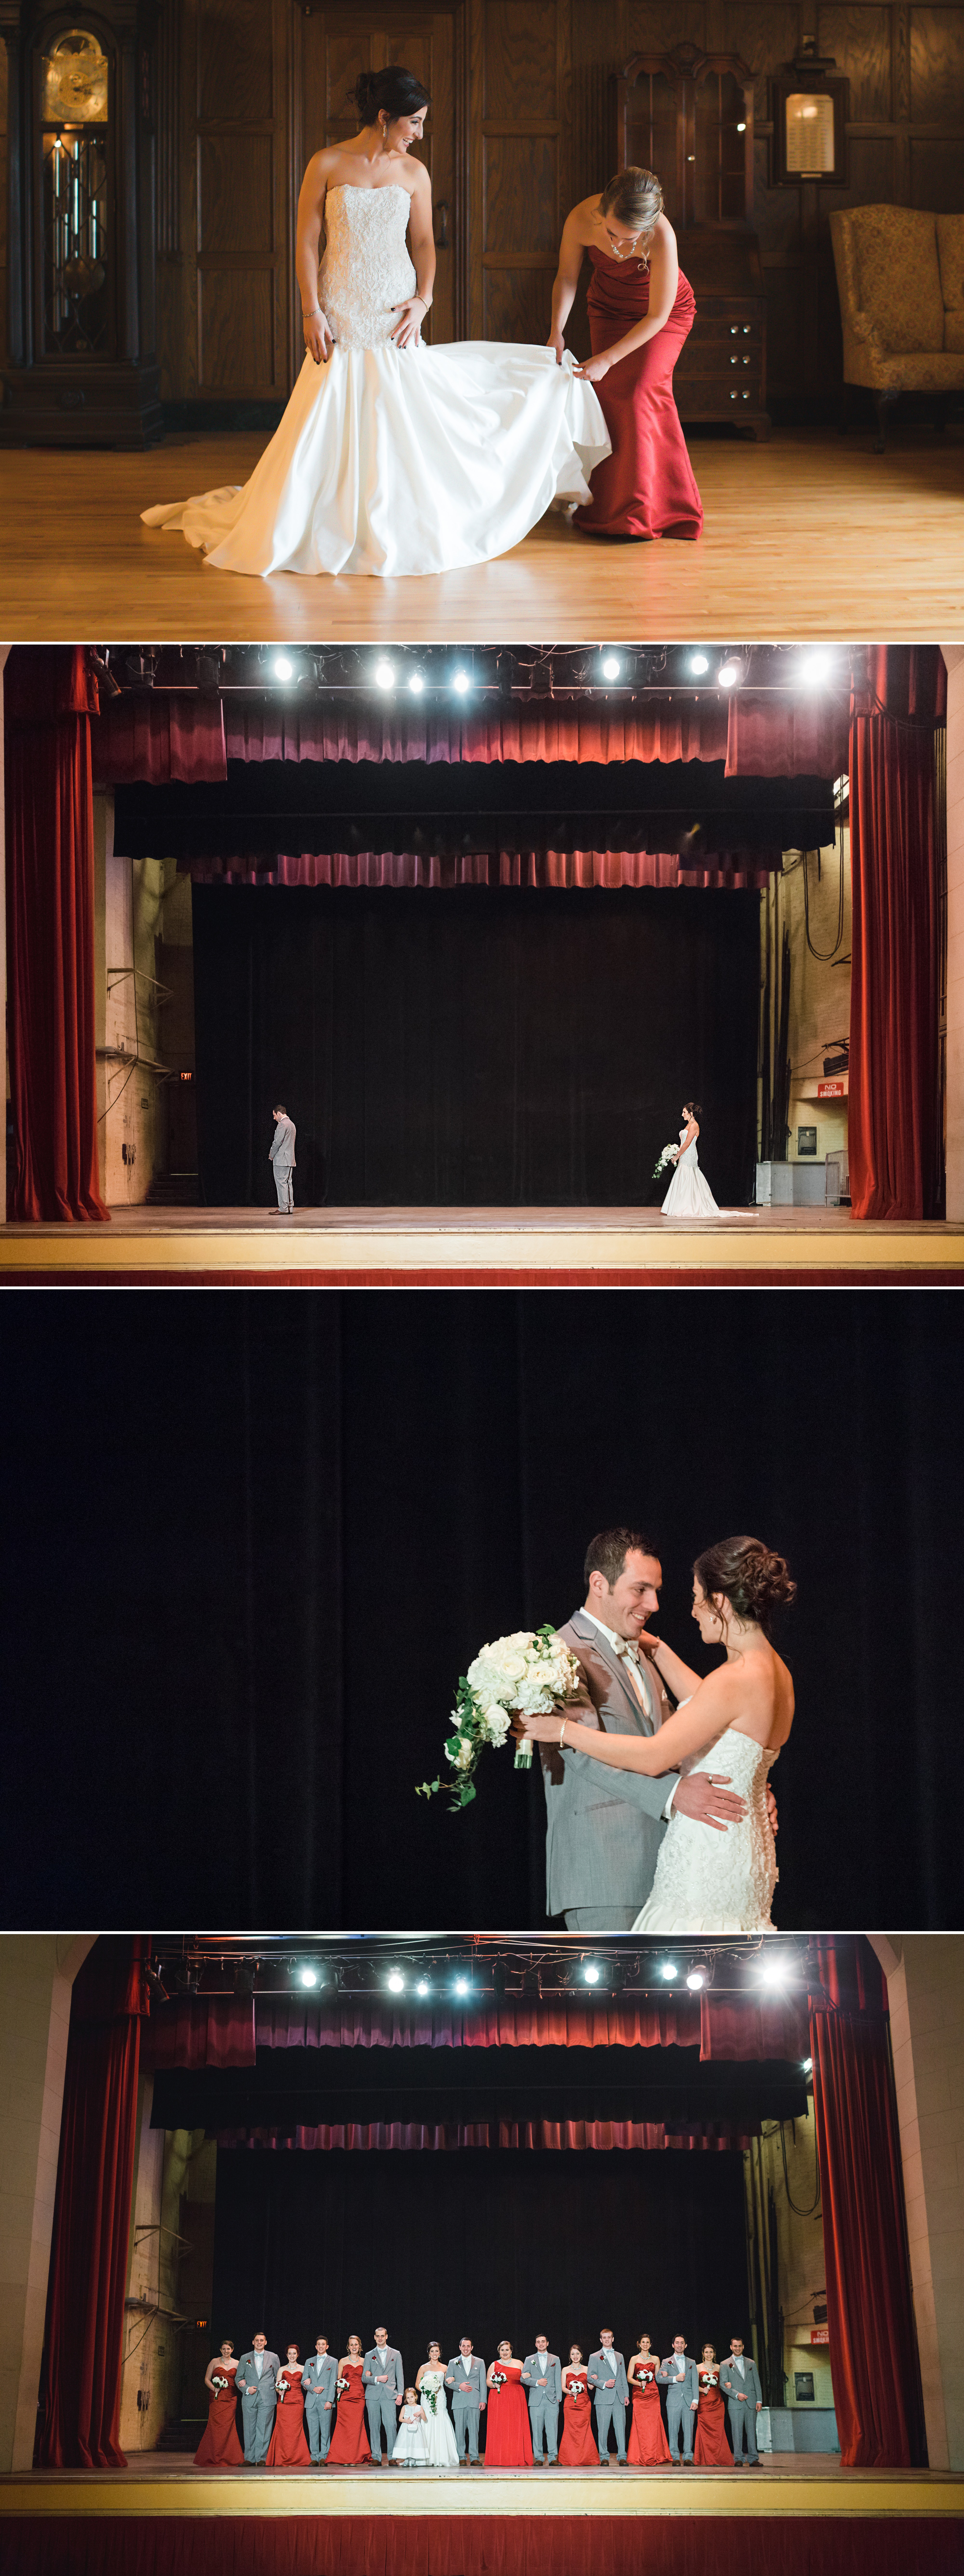 Bride and groom first look photos at a Masonic Temple Wedding in Detroit